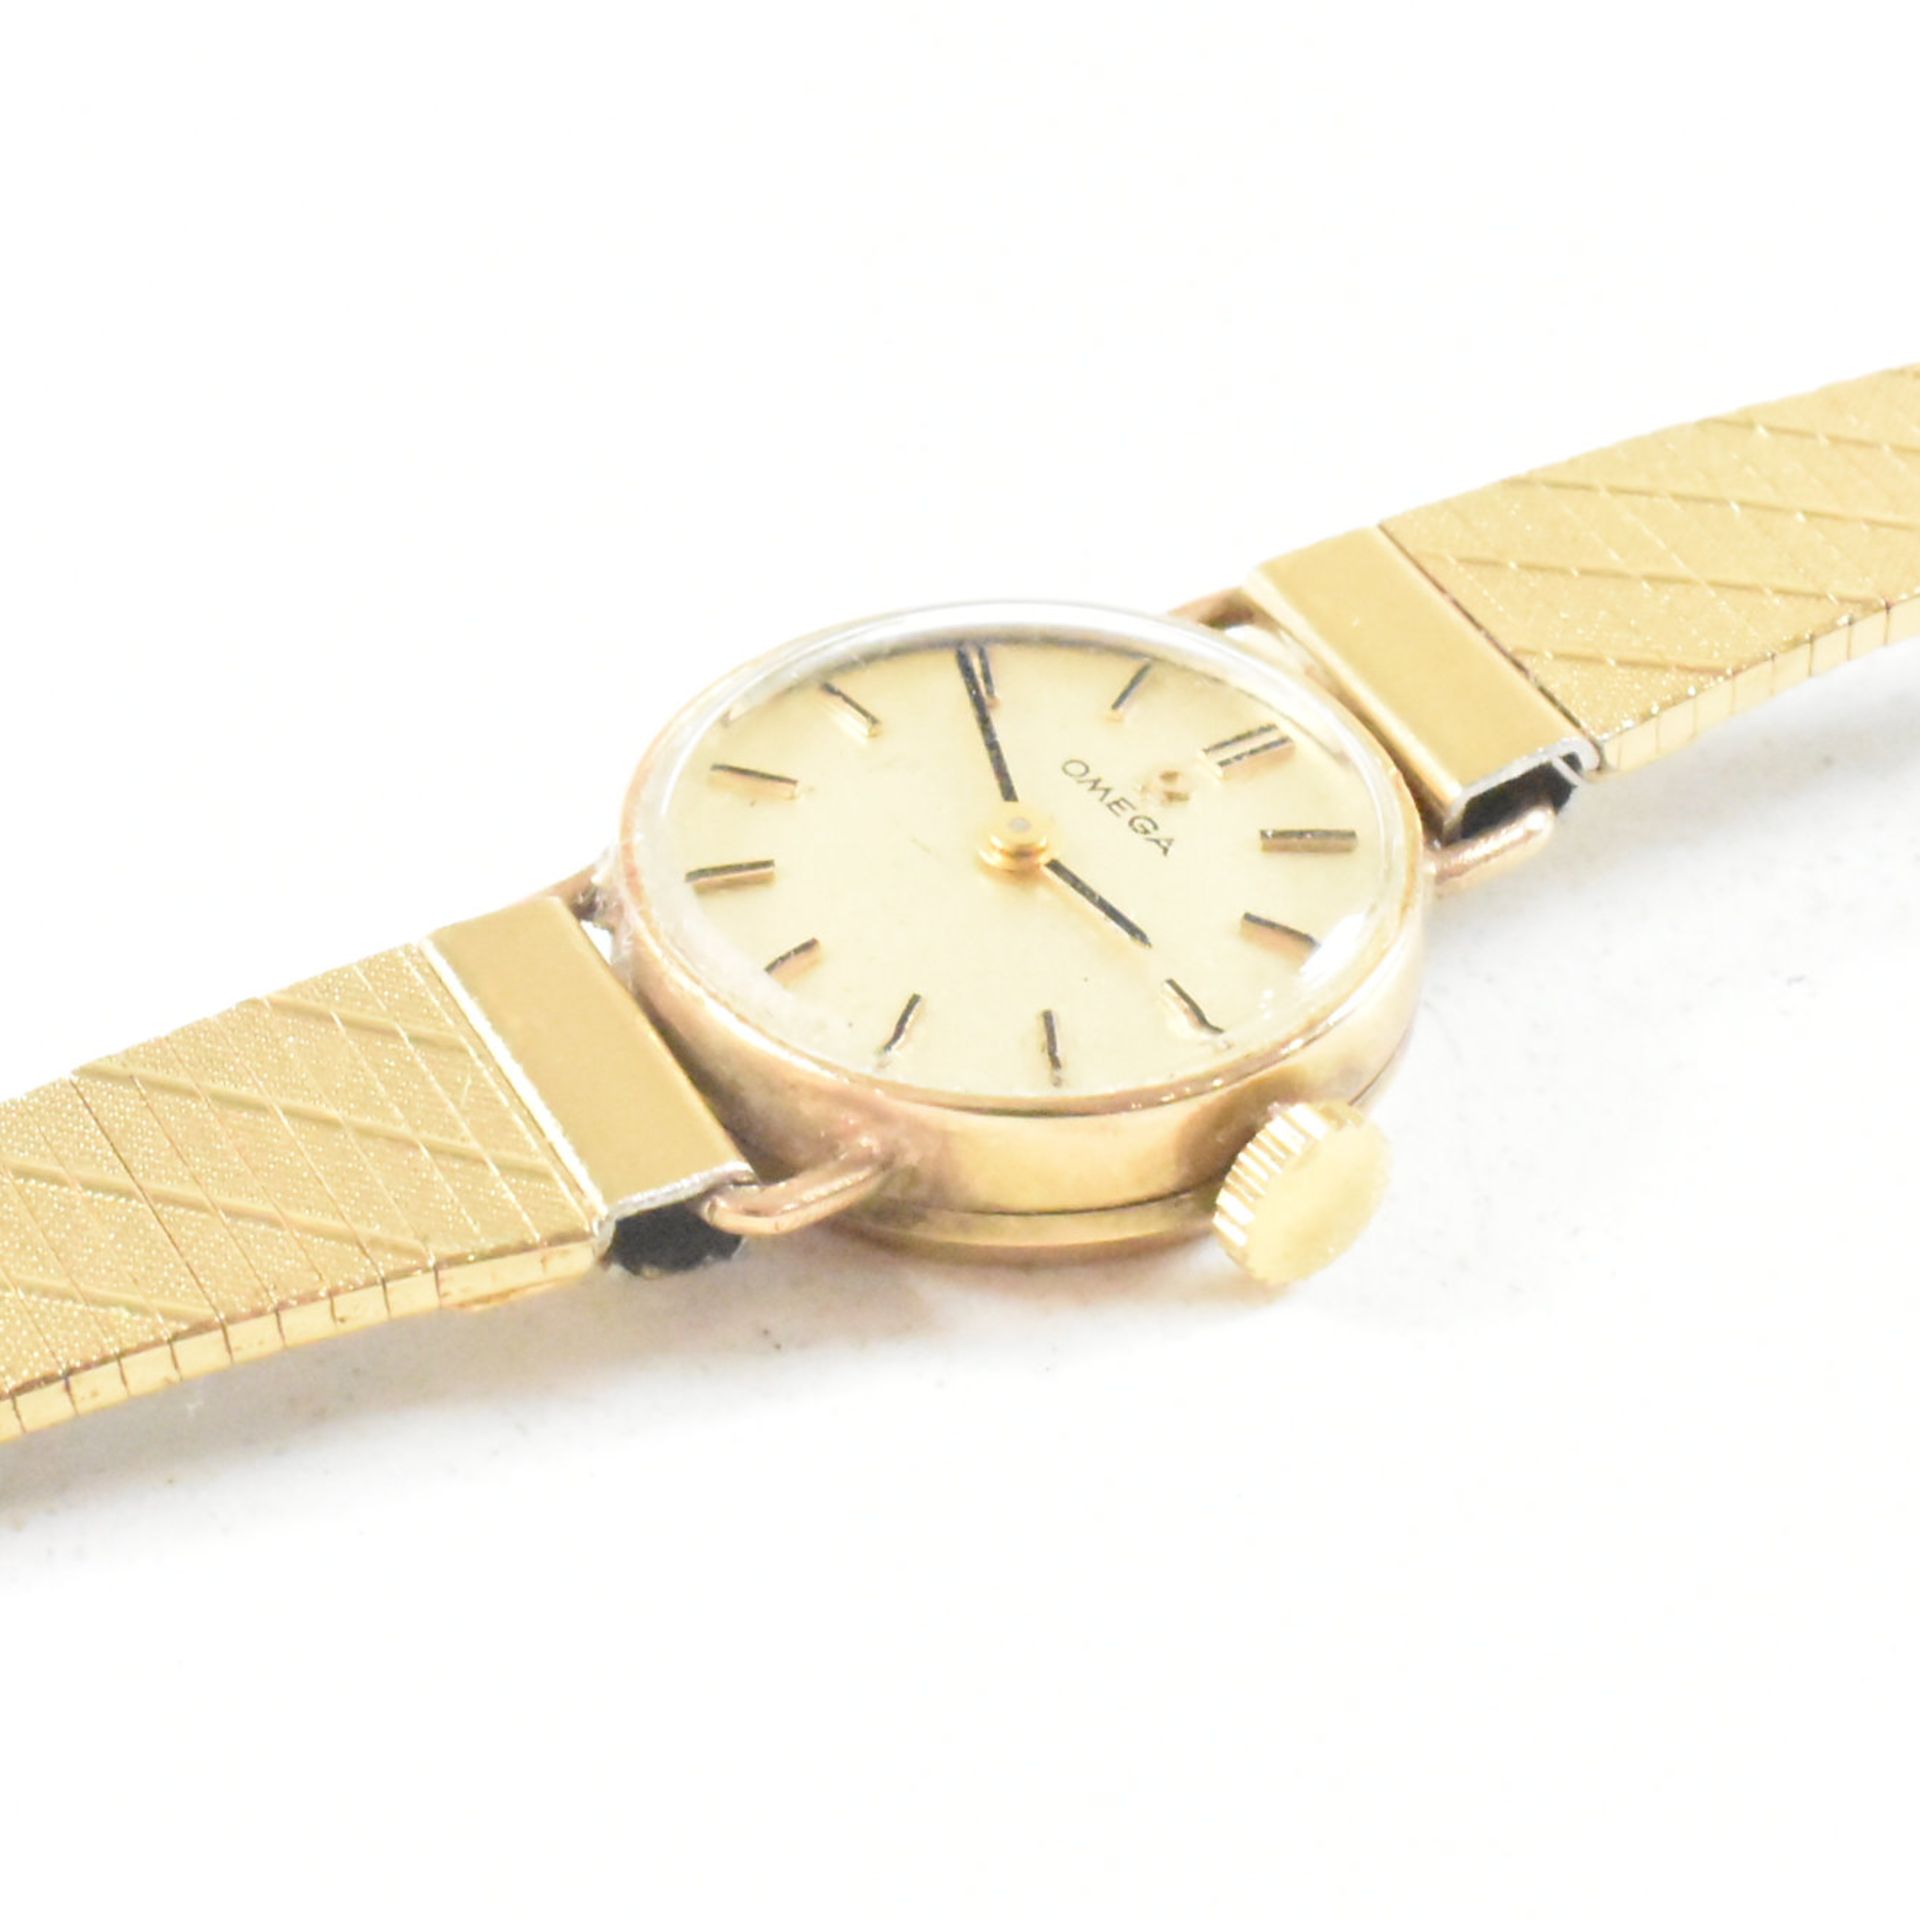 OMEGA HALLMARKED 9CT GOLD & STAINLESS STEEL COCKTAIL WATCH - Image 6 of 8